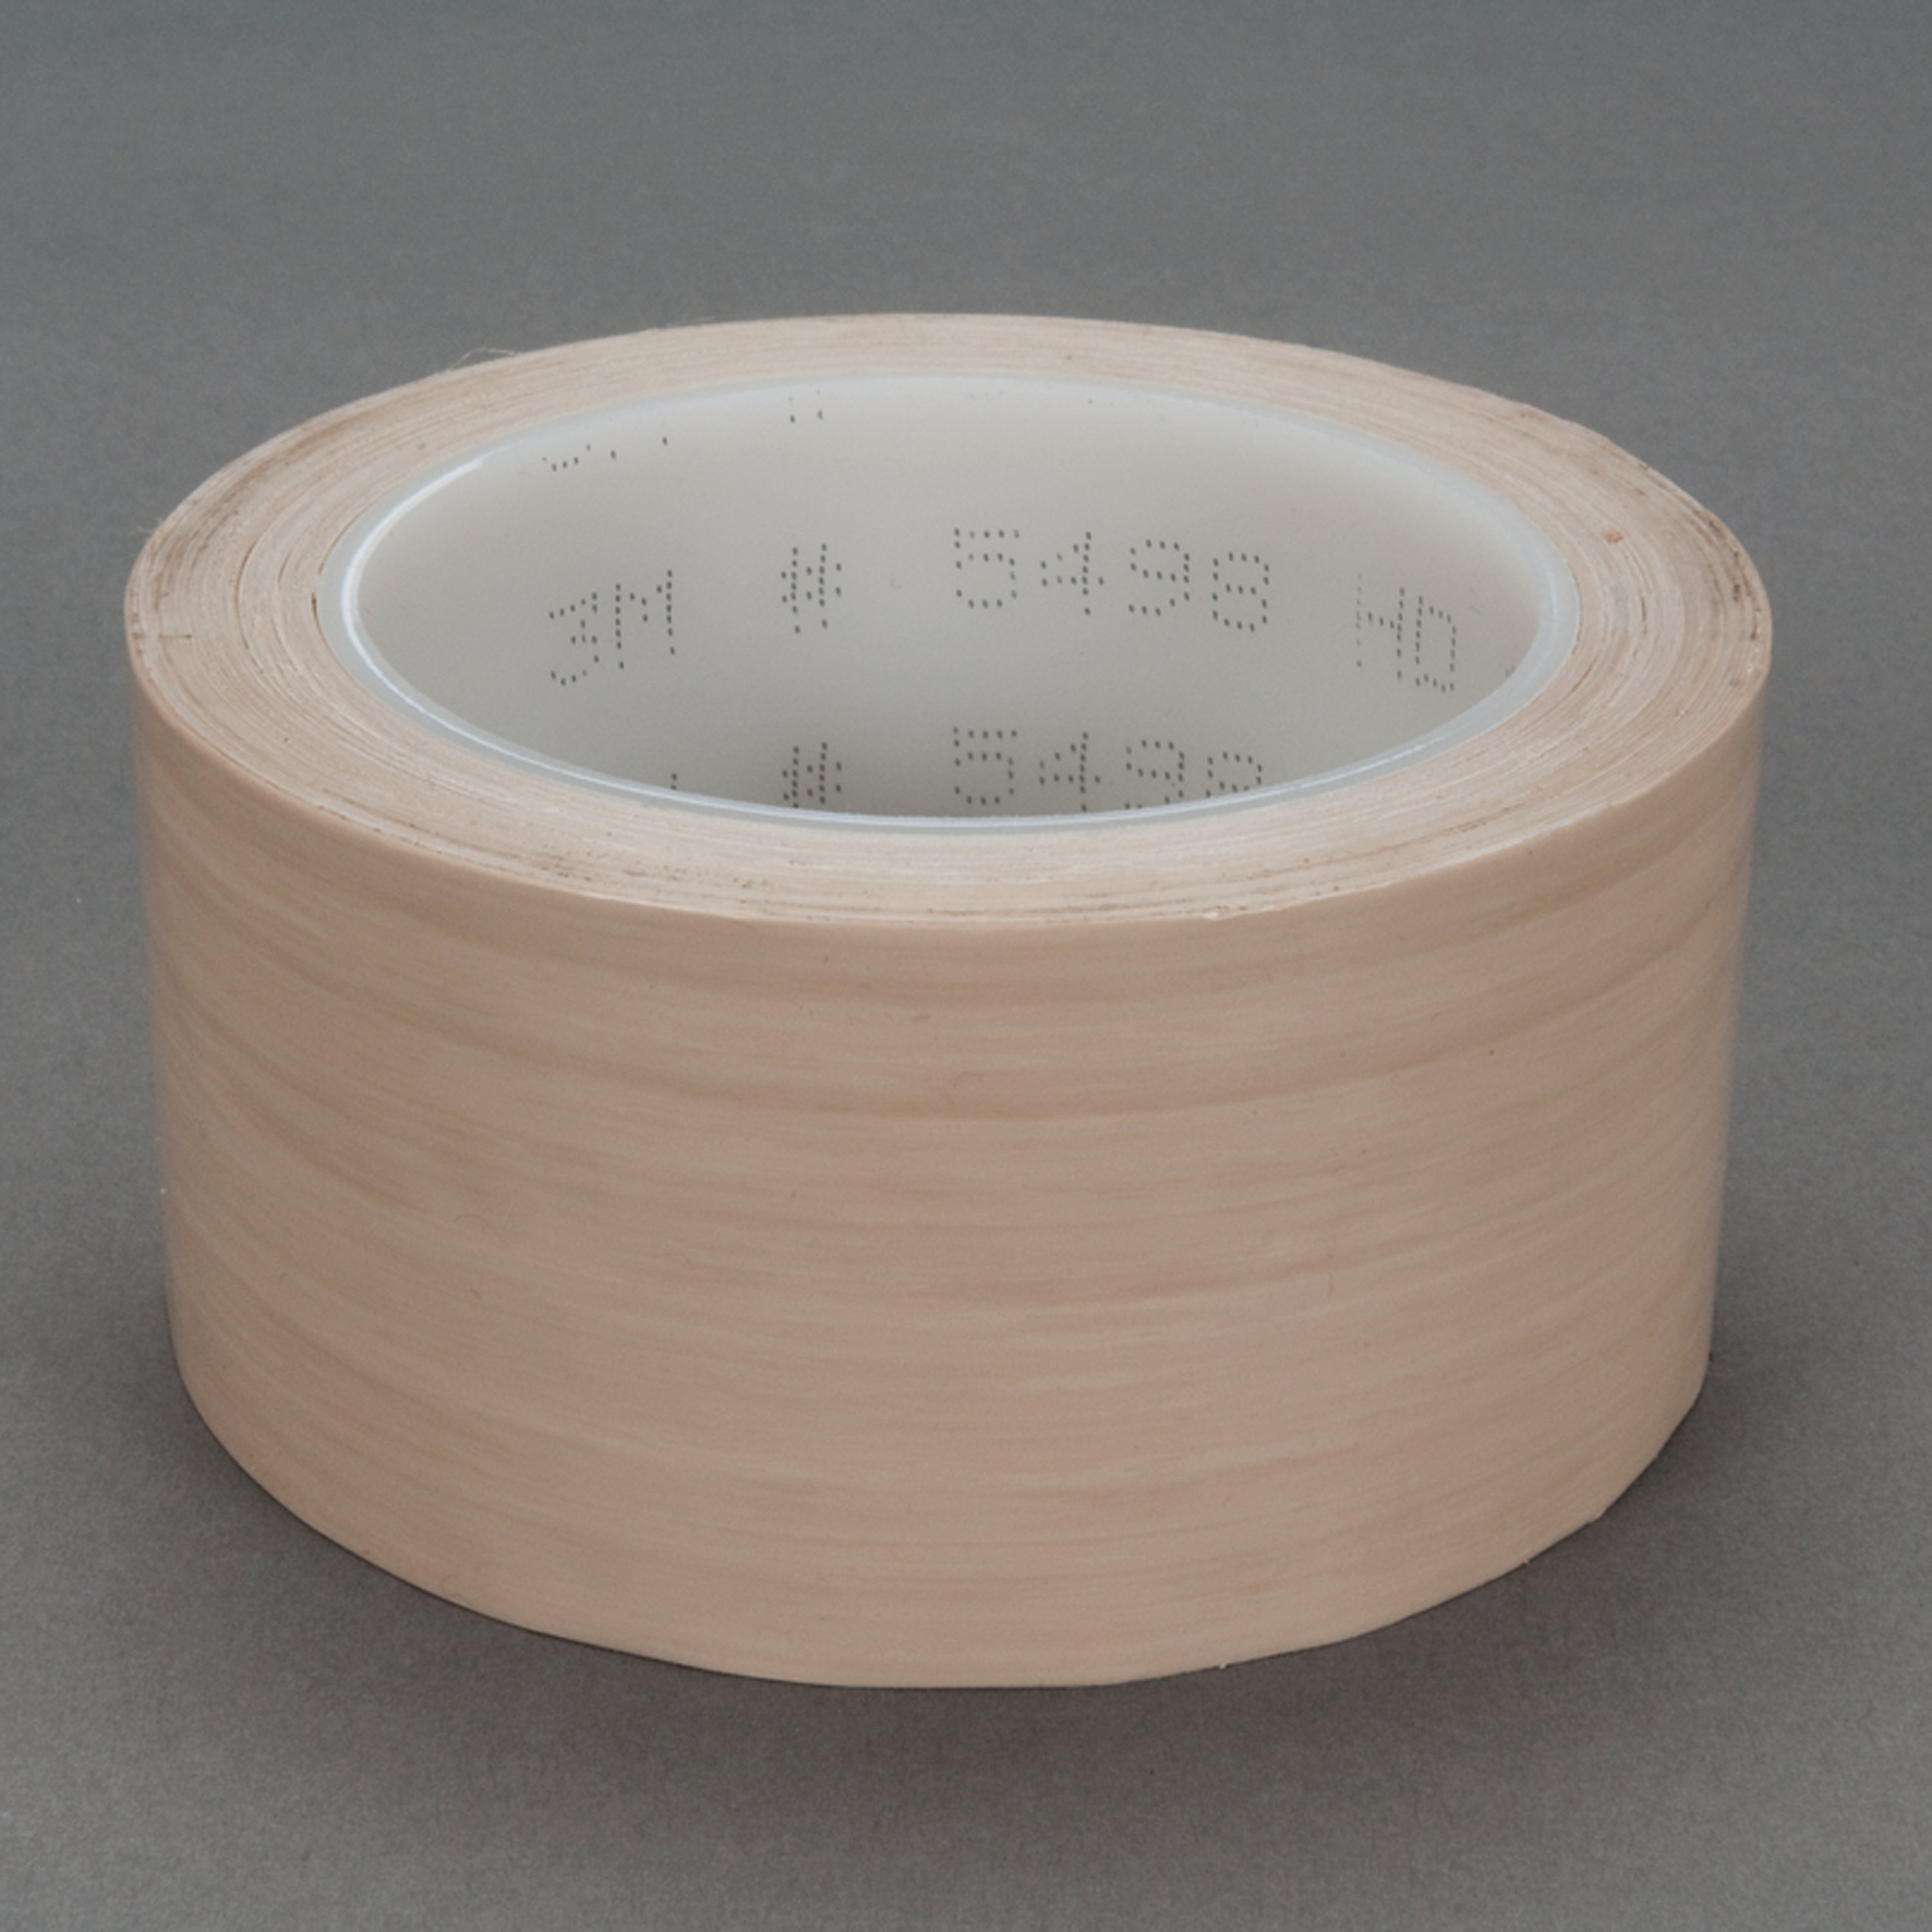 3M developed this tape as a quick and easy release medium between surfaces where pressure, temperature changes and other factors may create a measure of adhesion, particularly in composite bonding applications.